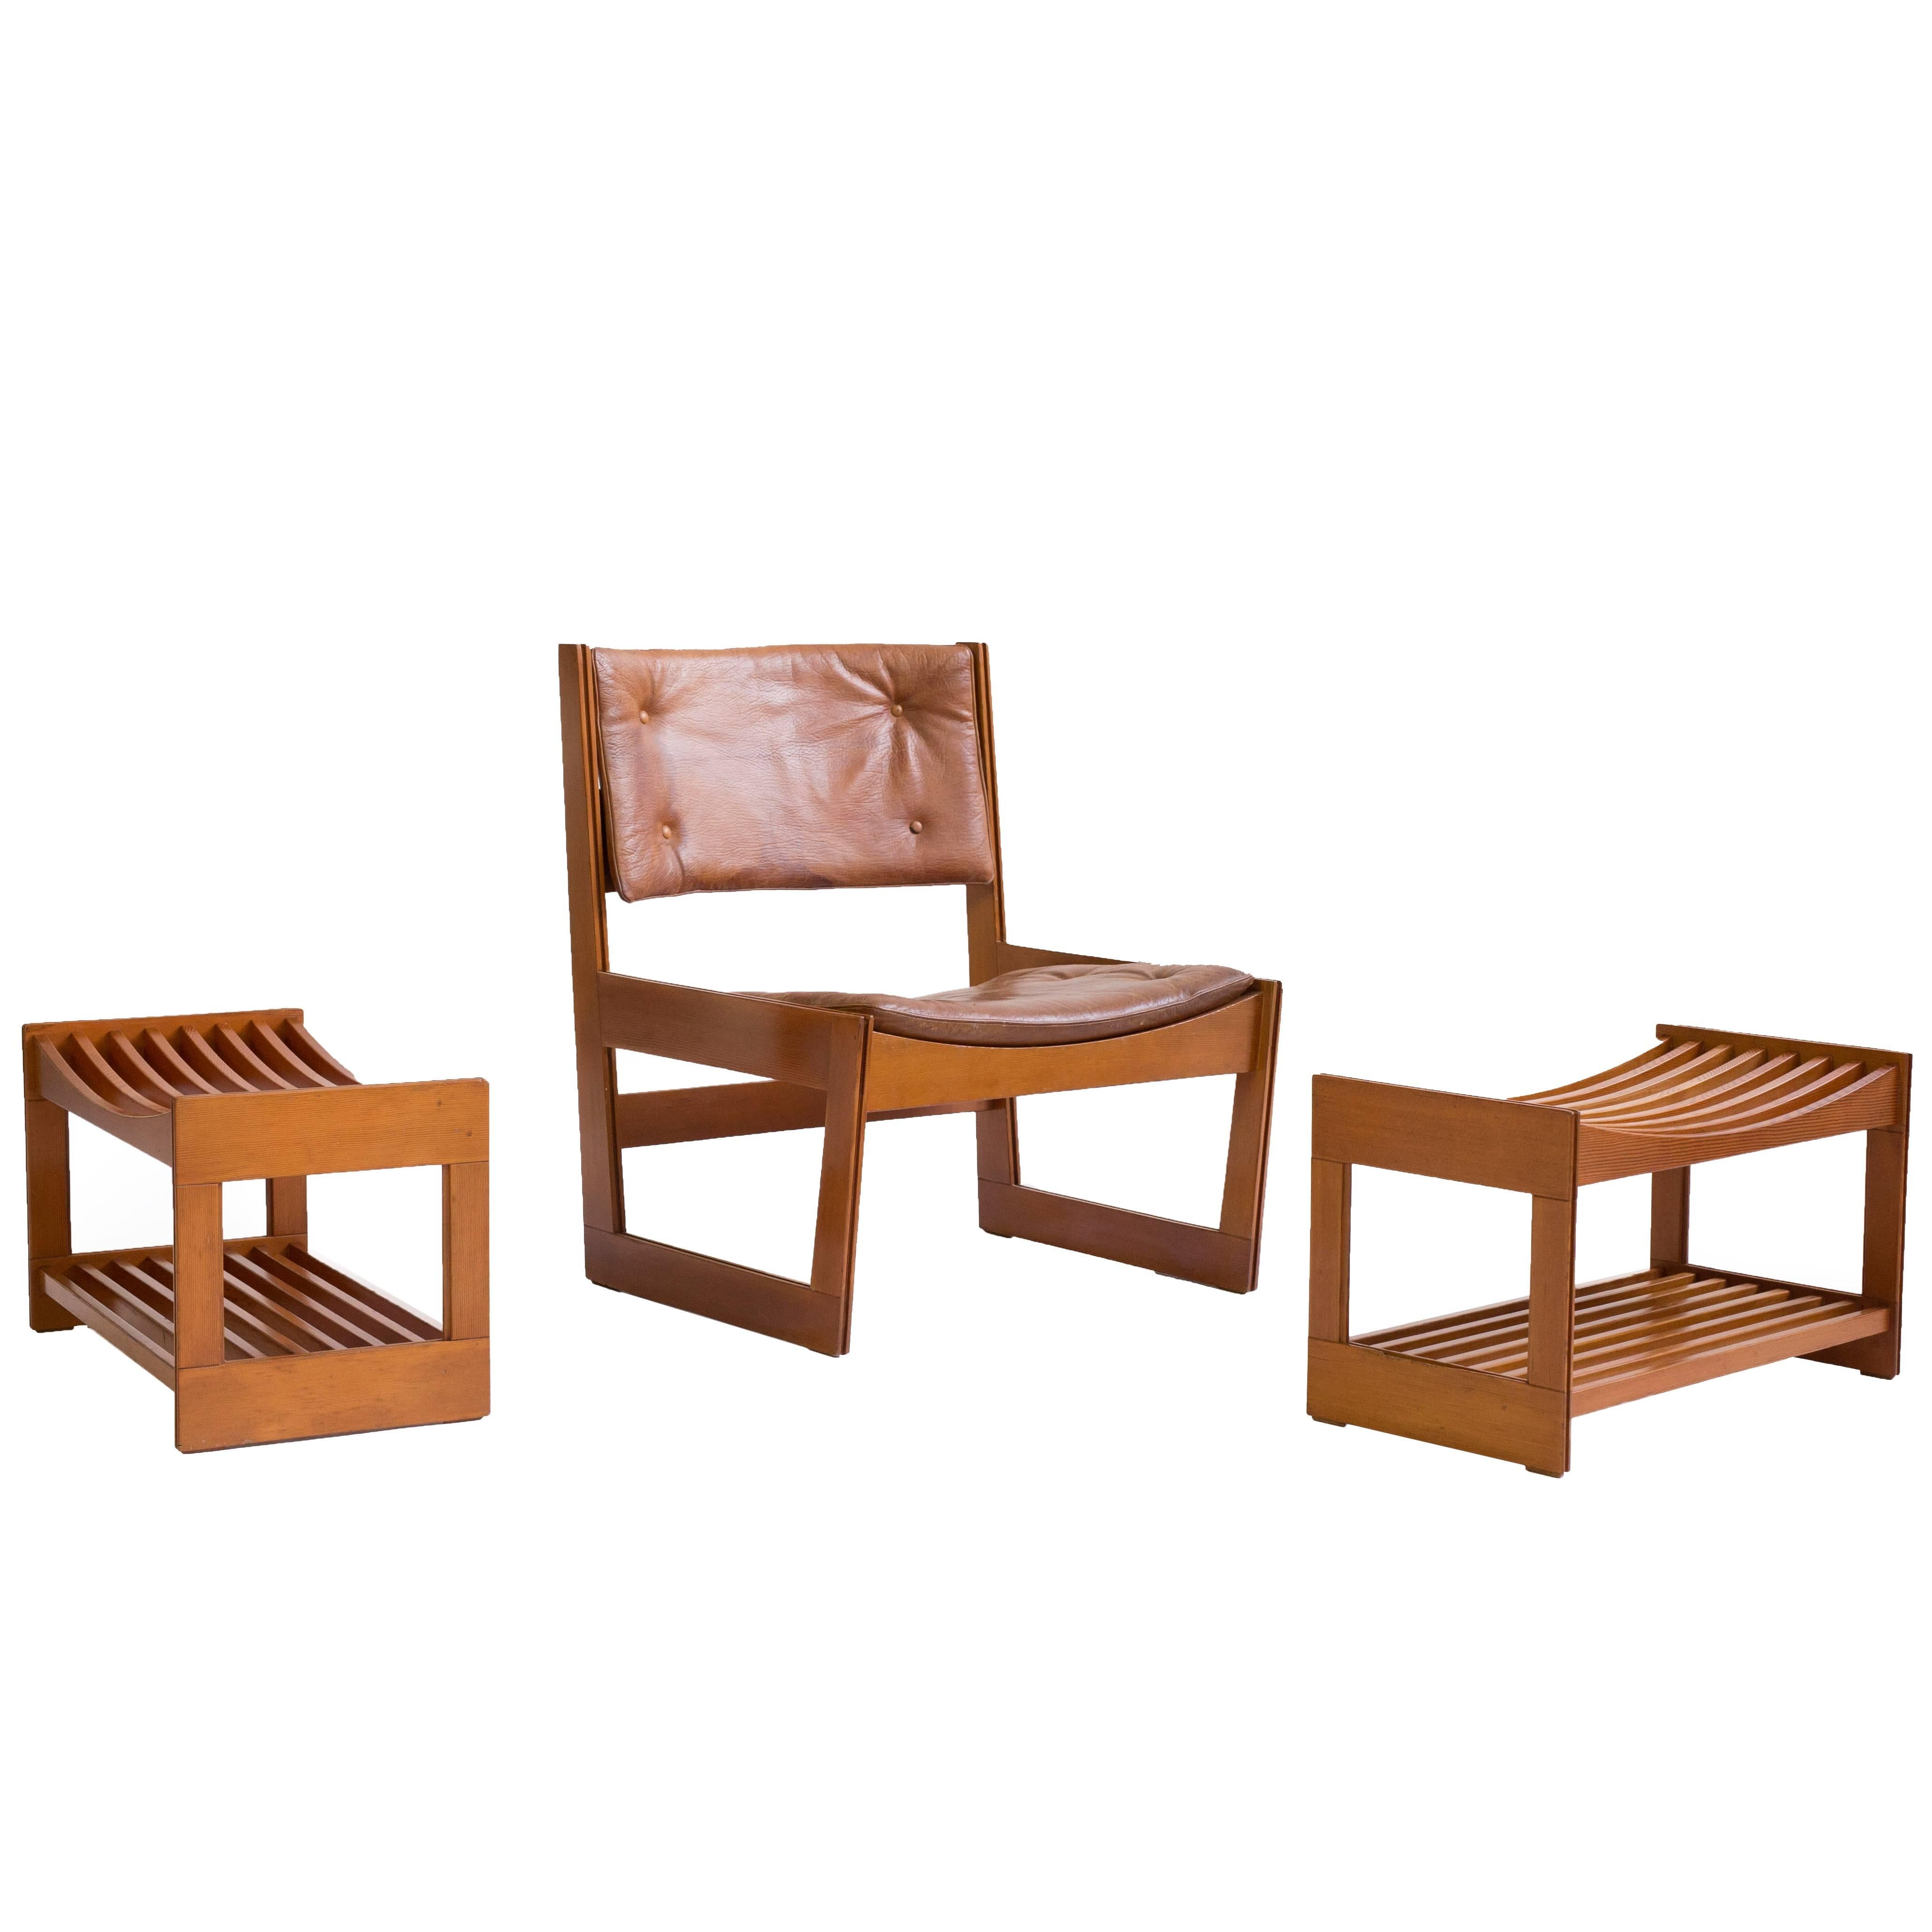 Grete Jalk Oregon Pine Easy chair with stools, 1963